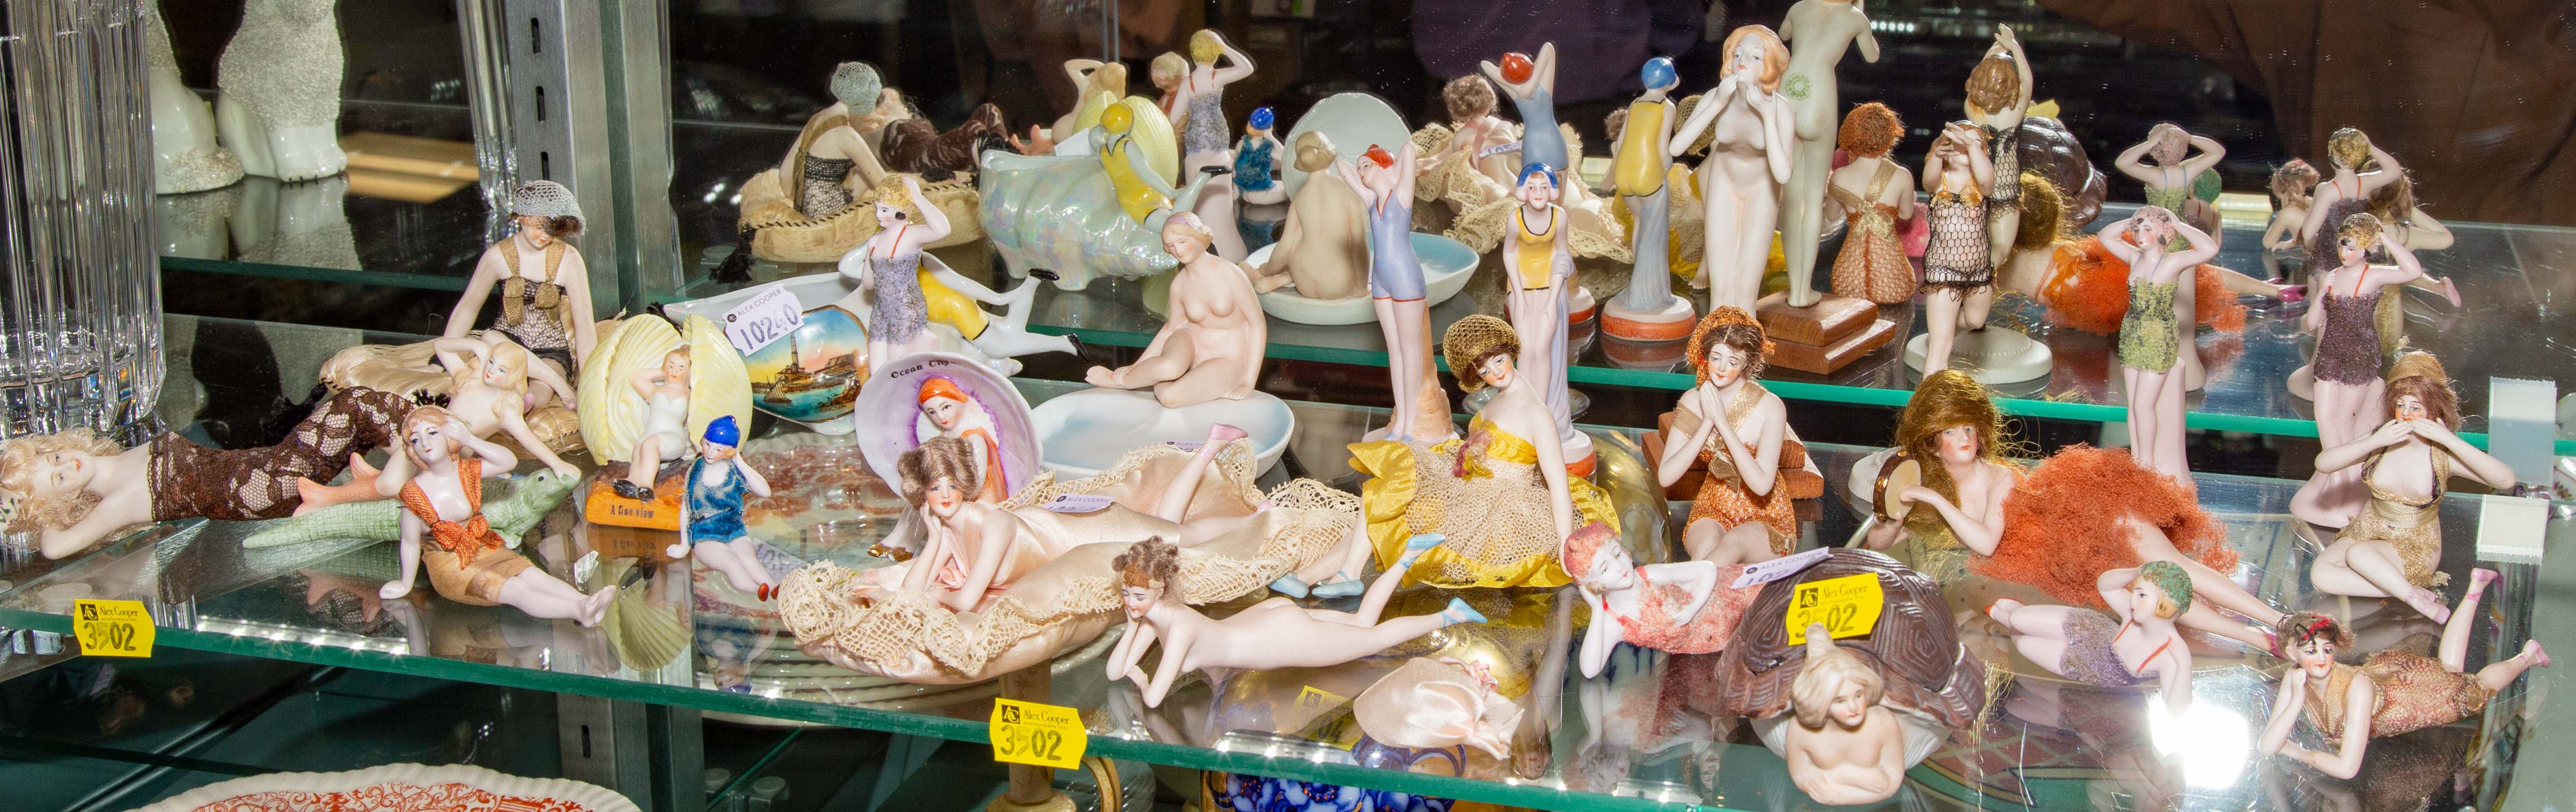 LARGE GROUP OF BISQUE RISQUE FIGURES